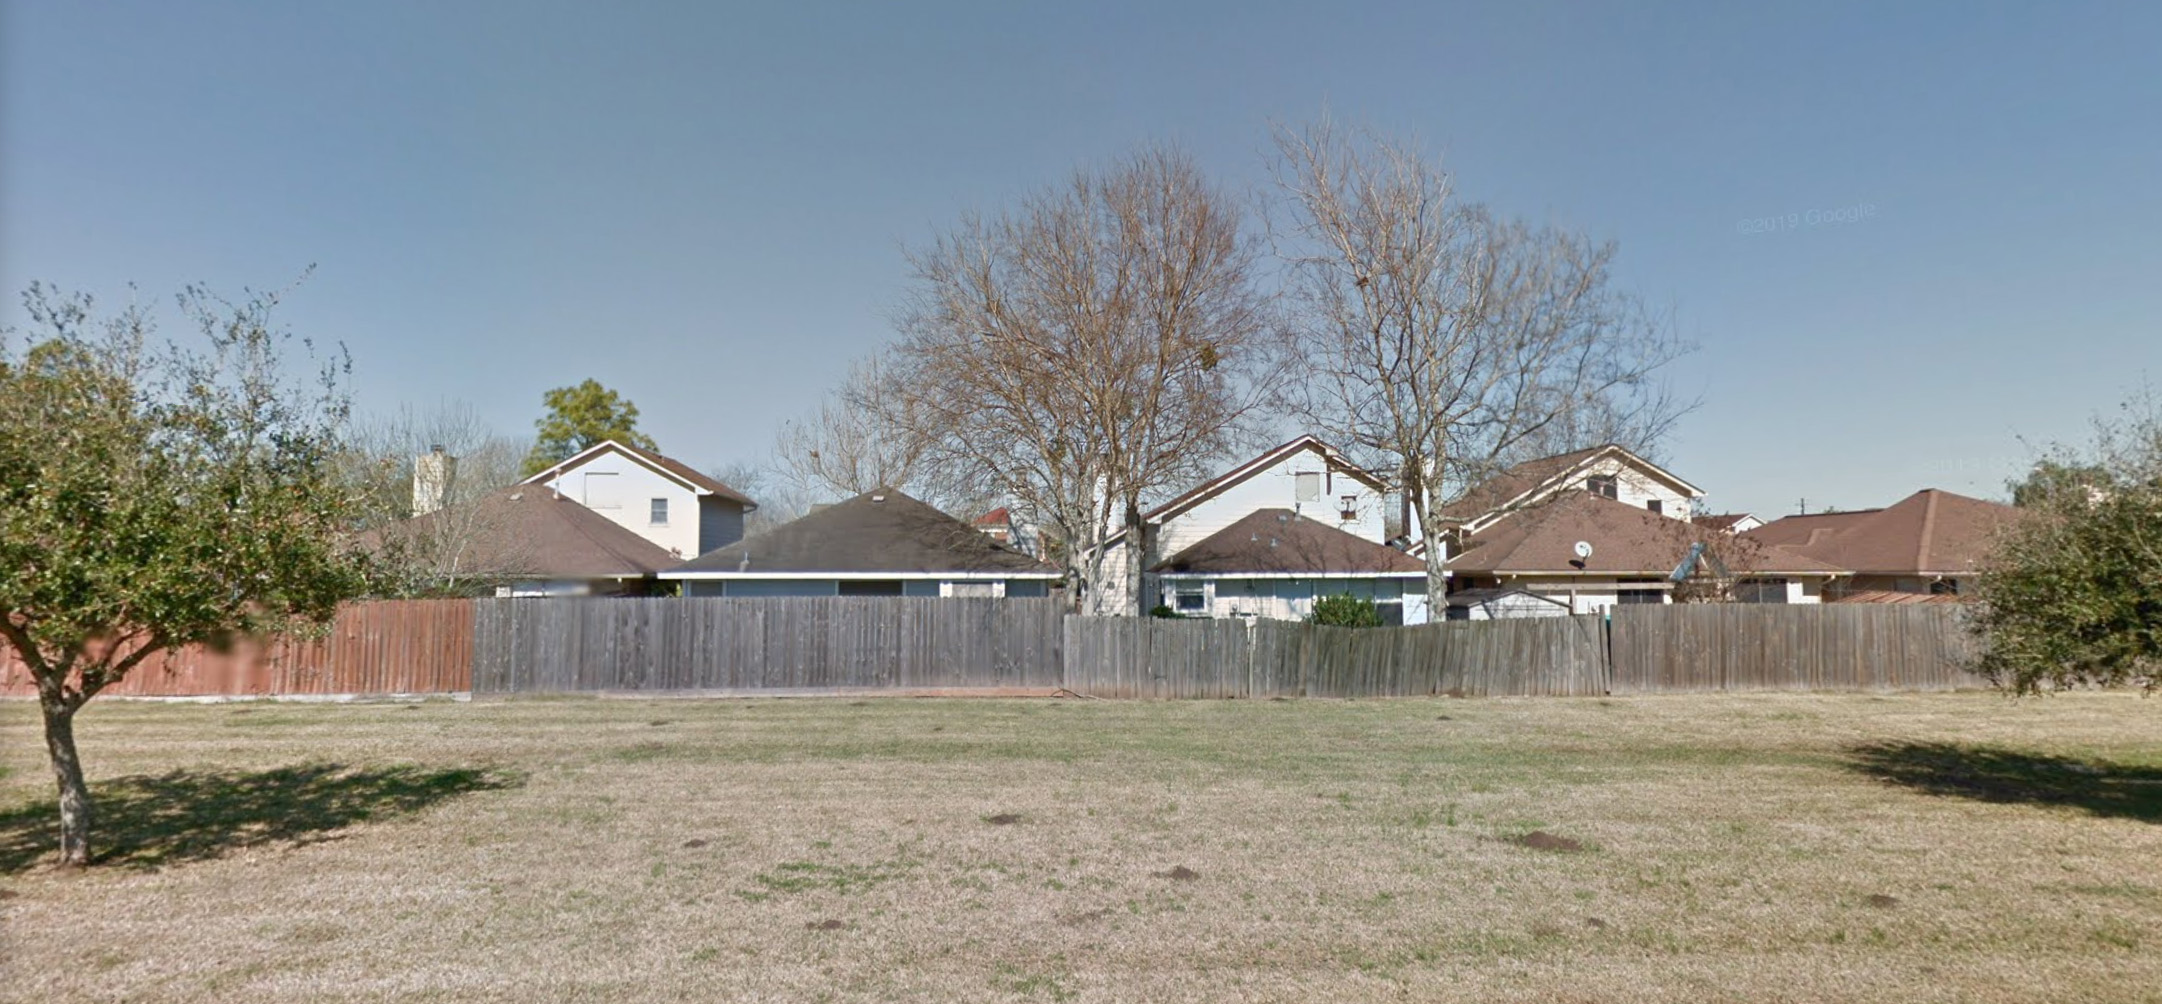 PHOTO: In this screen grab from Google Maps, houses in Lake Jackson, Tx. are shown.